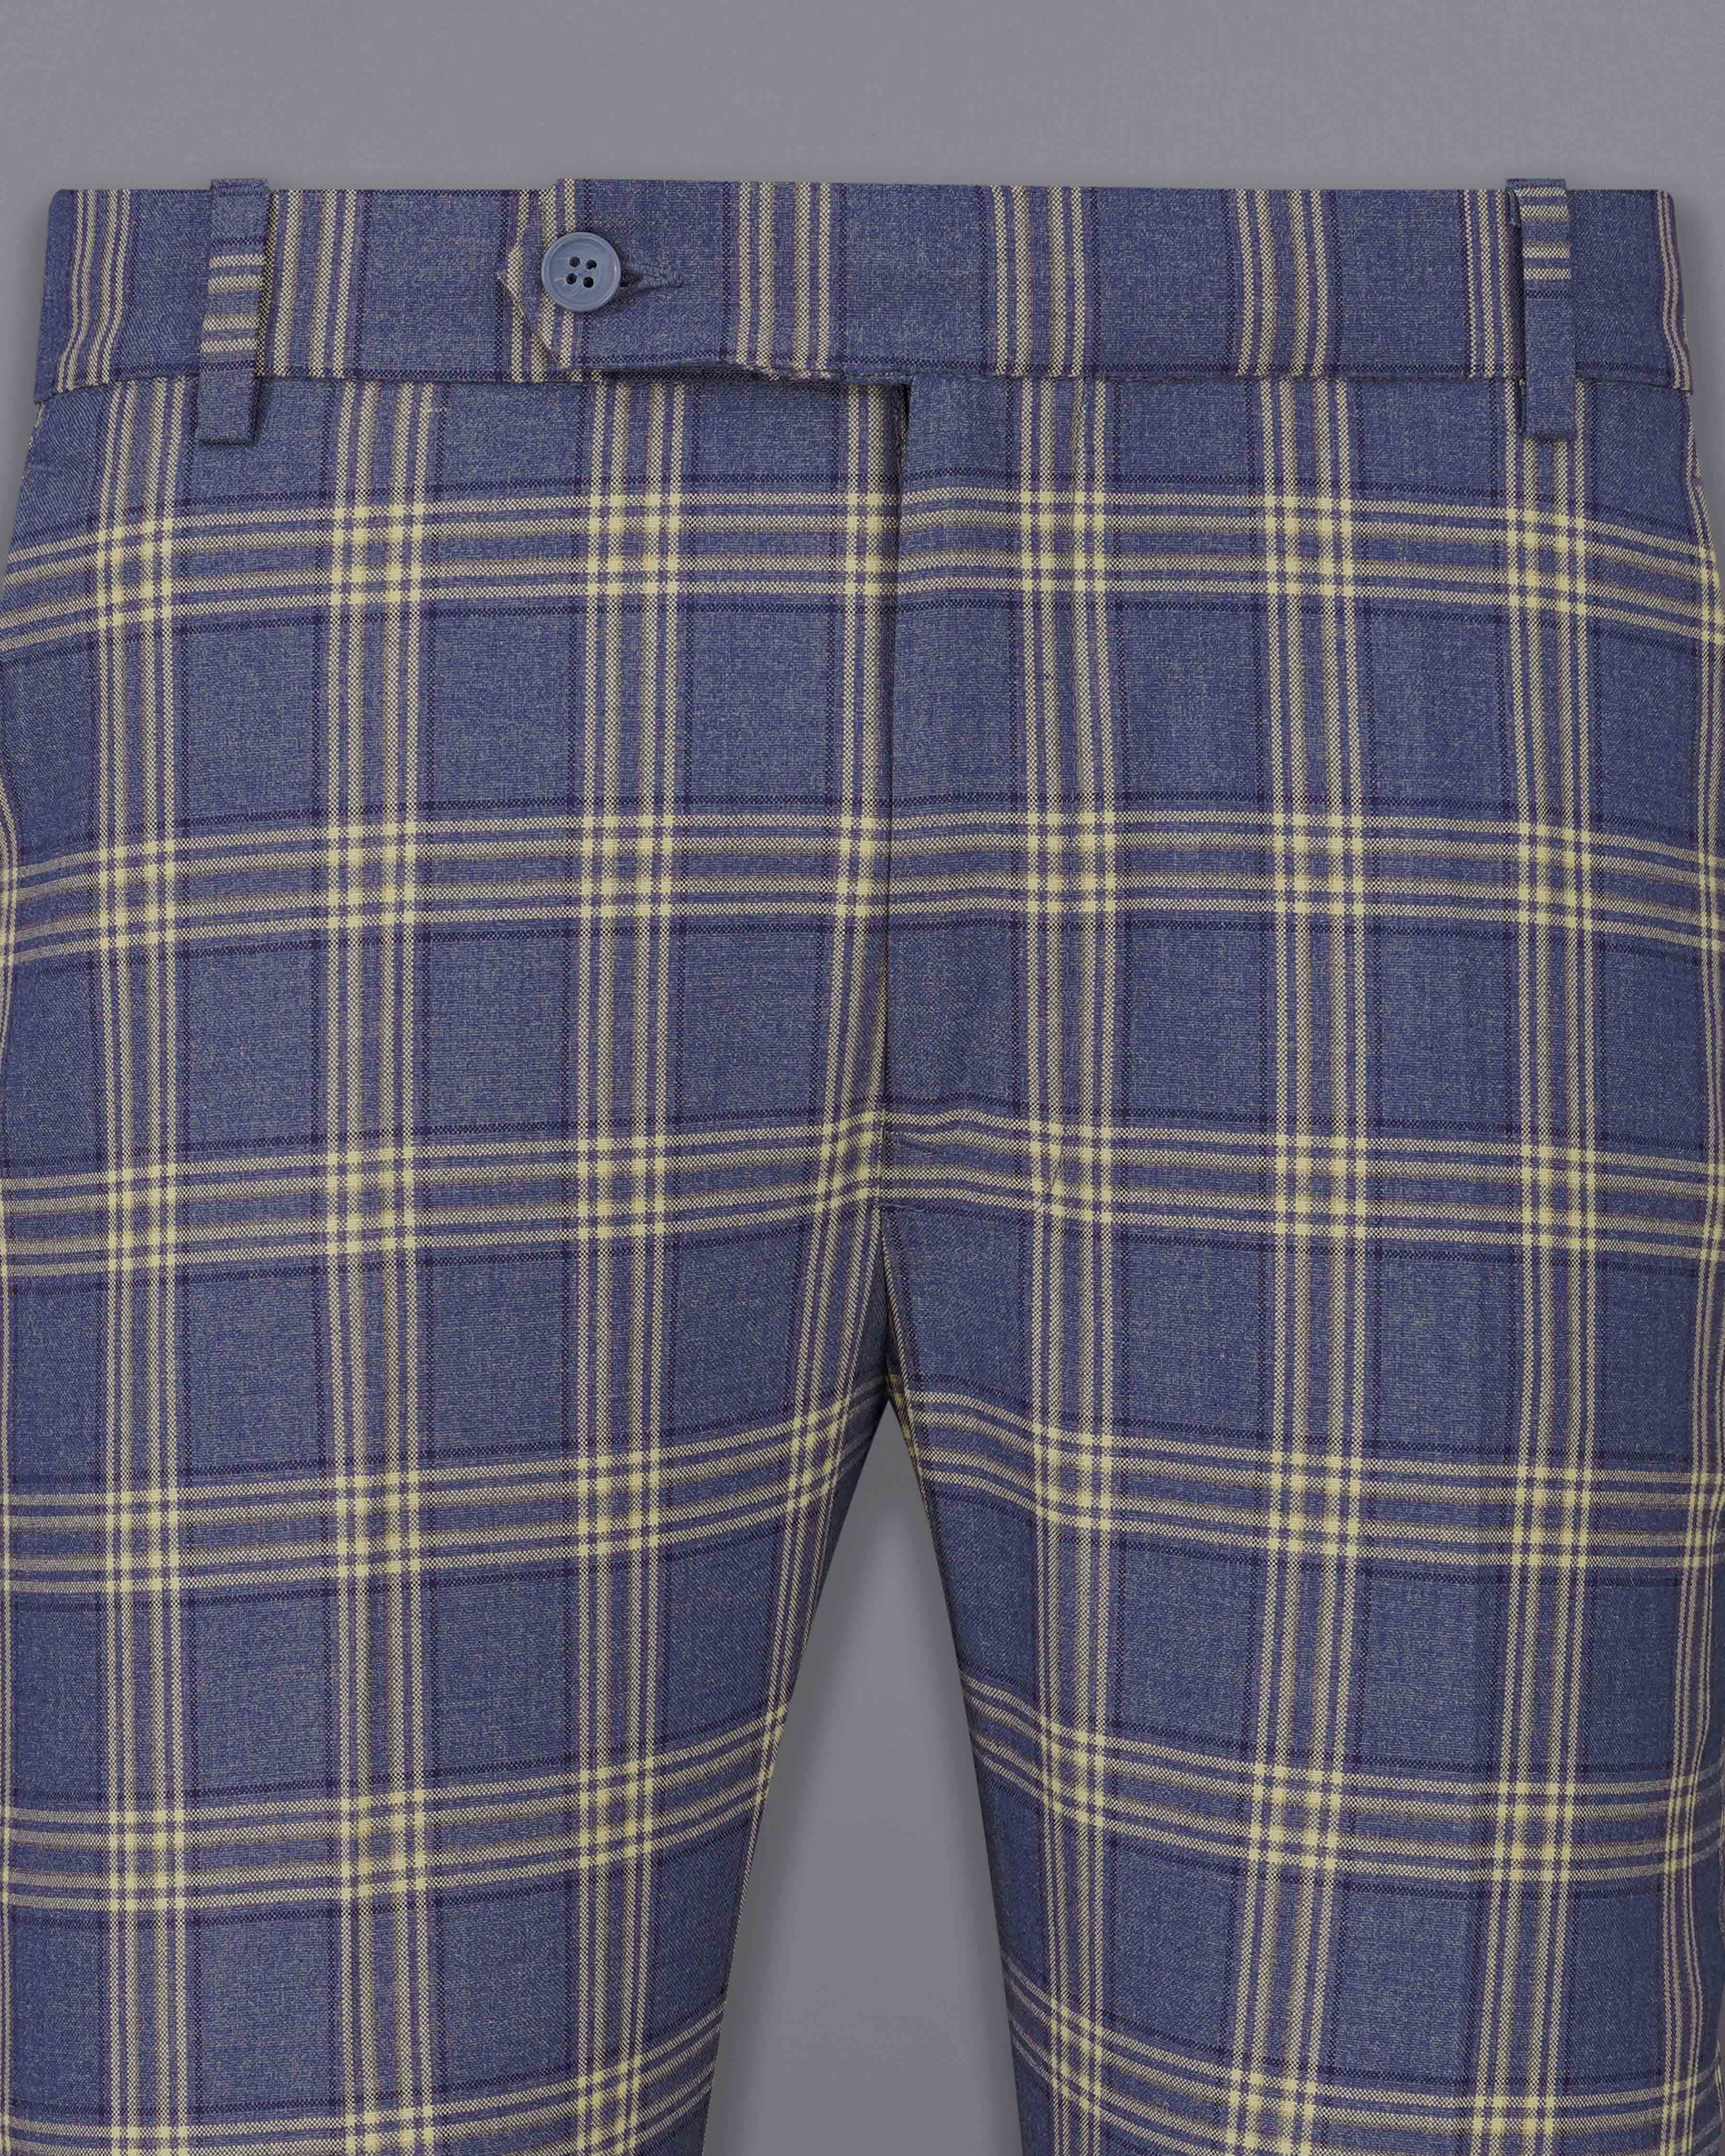 River Bed Blue with Tallow Brown Plaid Pant T2045-28, T2045-30, T2045-32, T2045-34, T2045-36, T2045-38, T2045-40, T2045-42, T2045-44